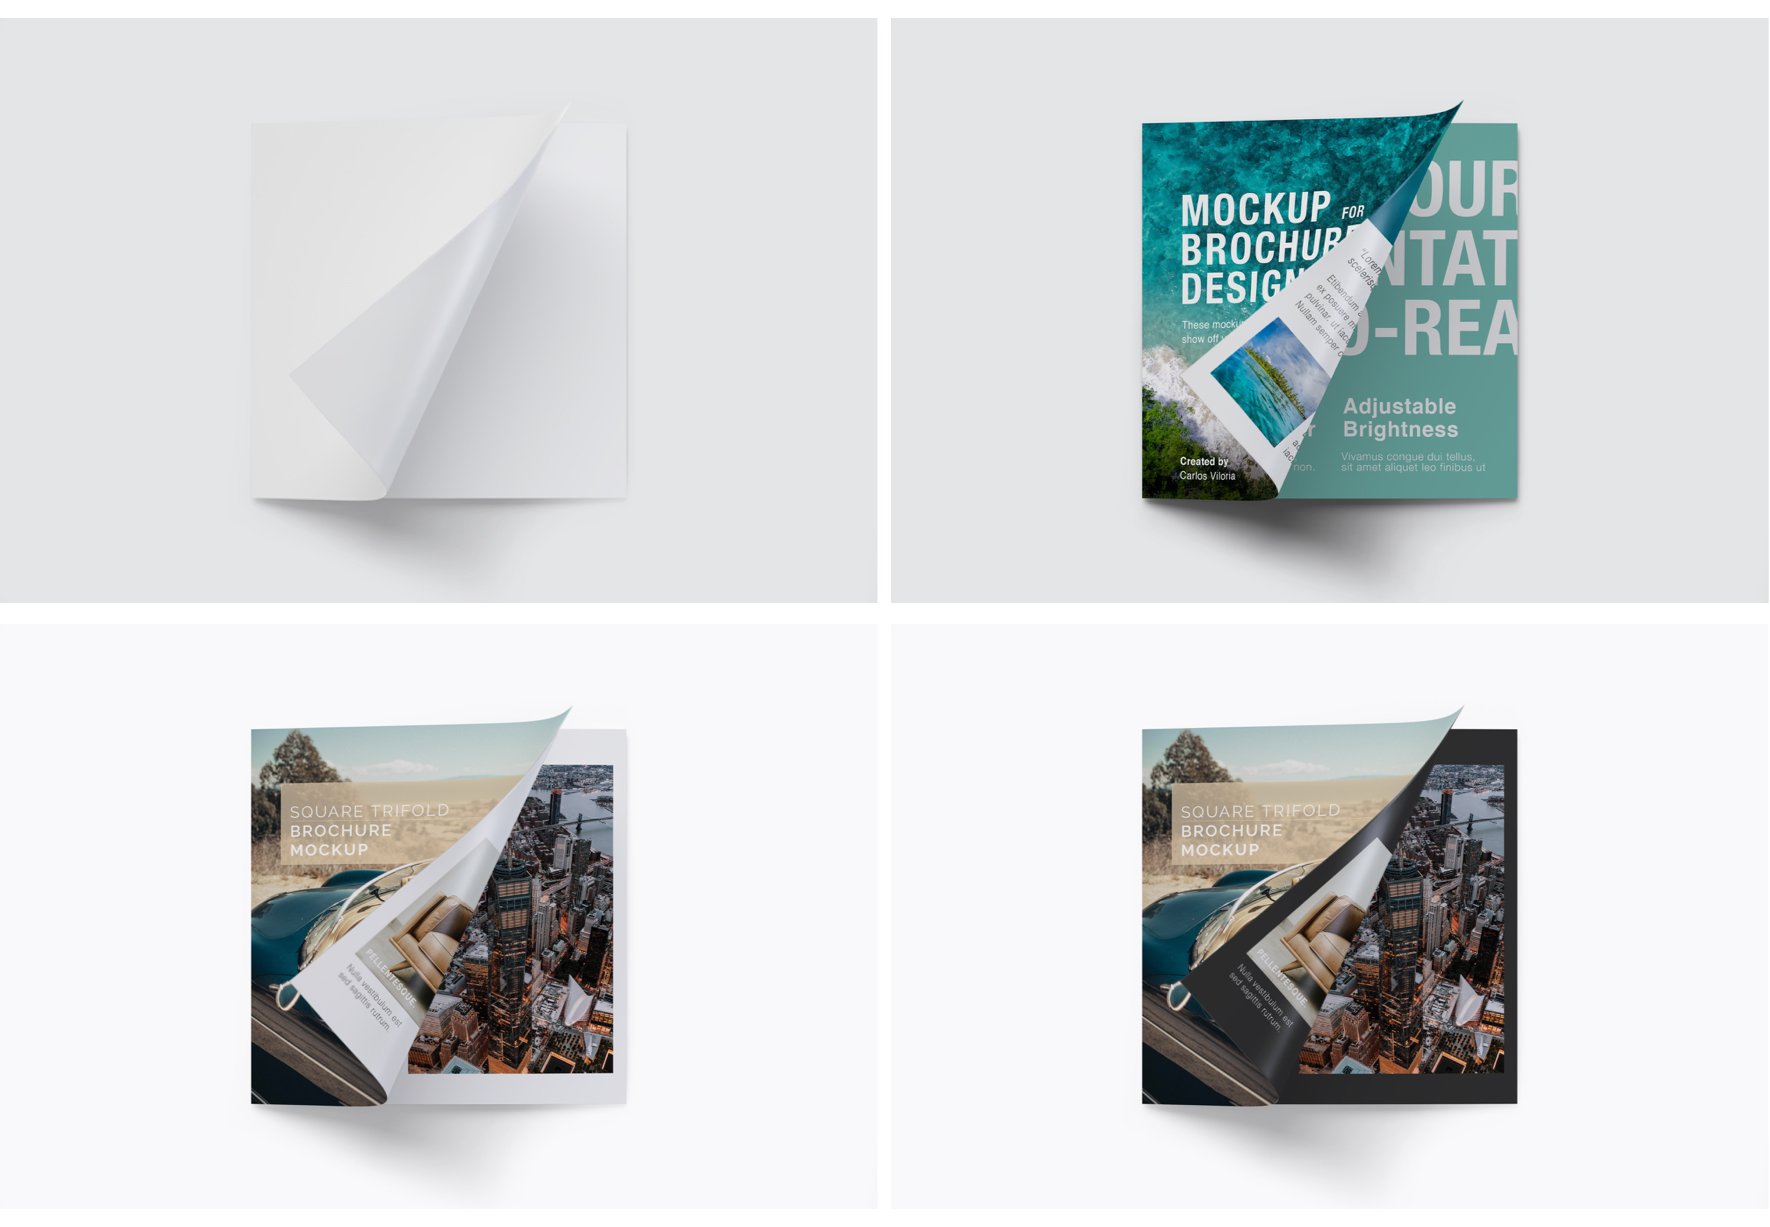 square trifold brochure mockup 03 preview gr gallery3x 610